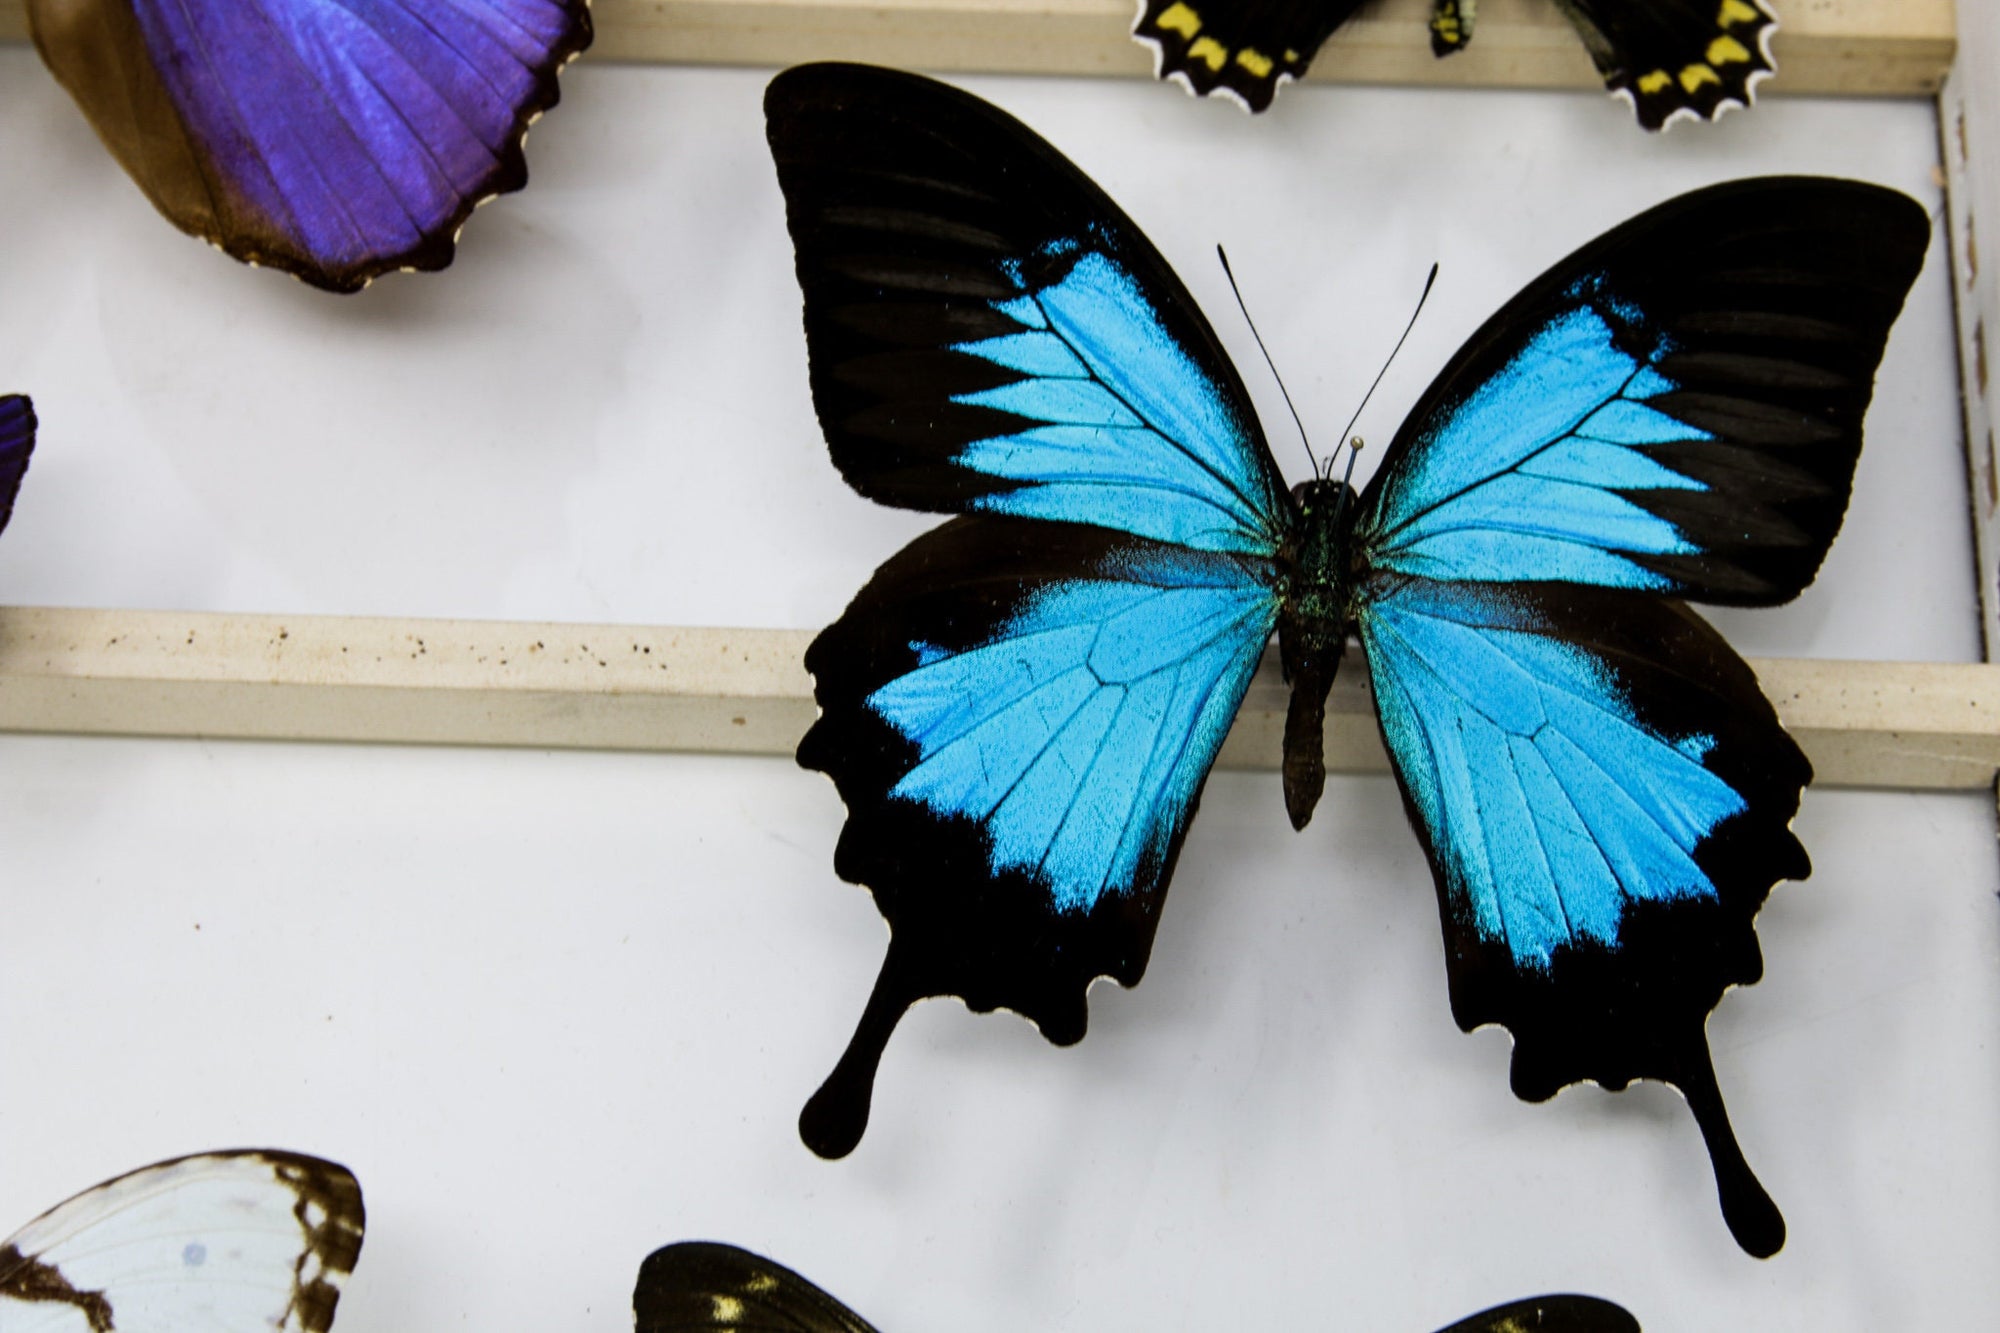 Papilio ulysses | Unmounted Blue Swallowtail Butterflies | Dry-Preserved Specimens, Entomology Taxidermy Art-Supplies